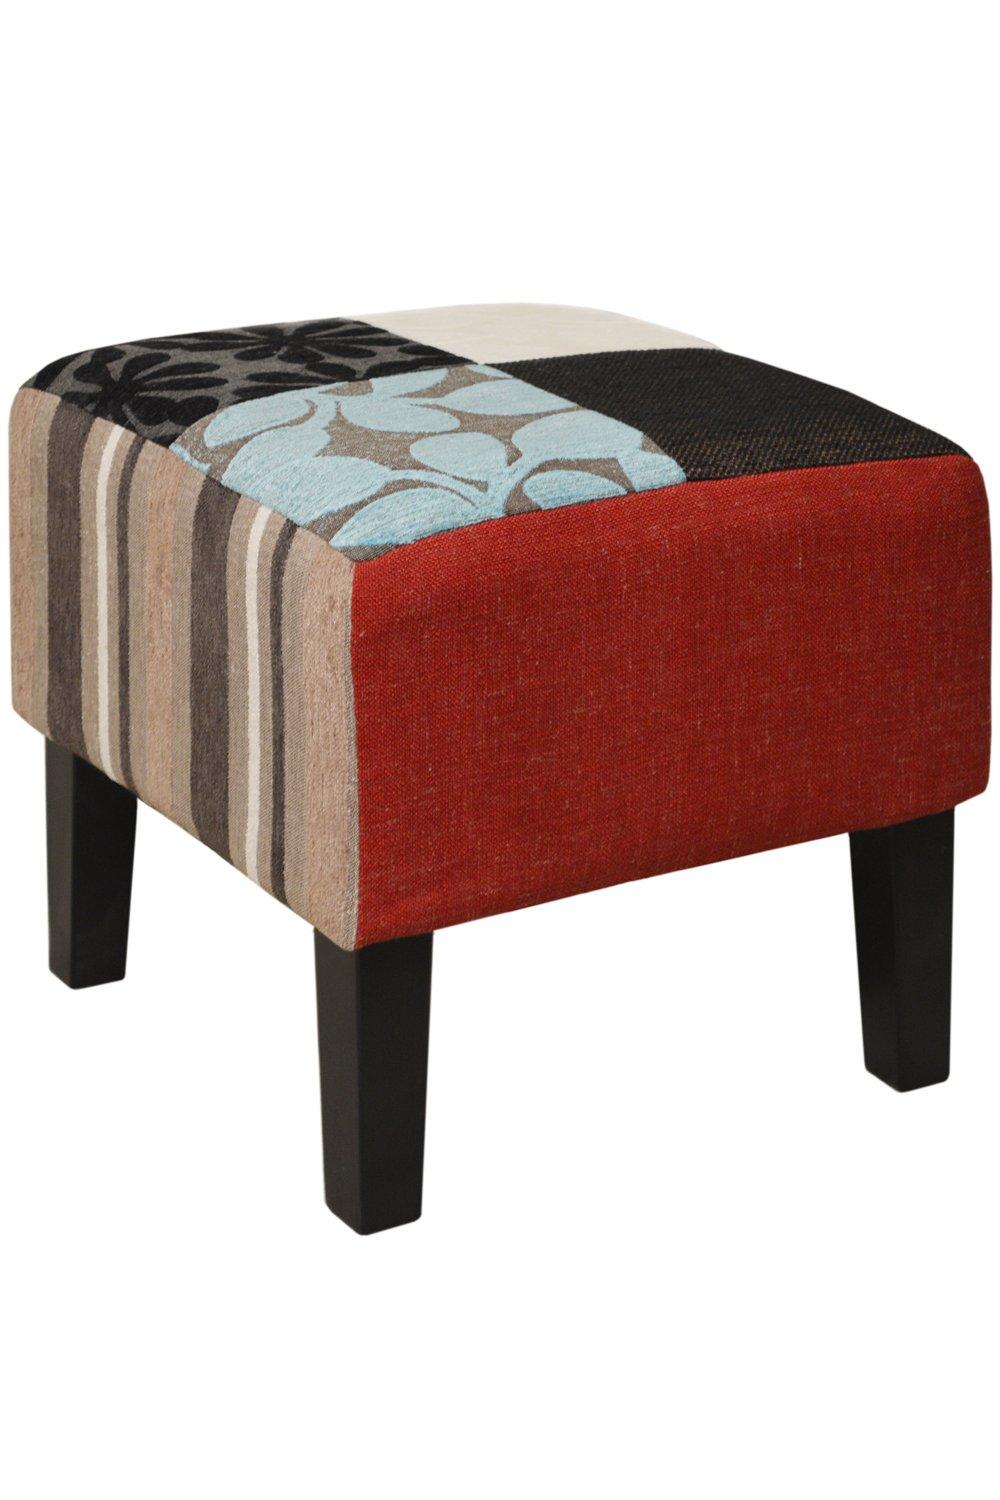 Plush Patchwork - Shabby Chic Square Pouffe Stool  Wood Legs - Blue  Green  Red